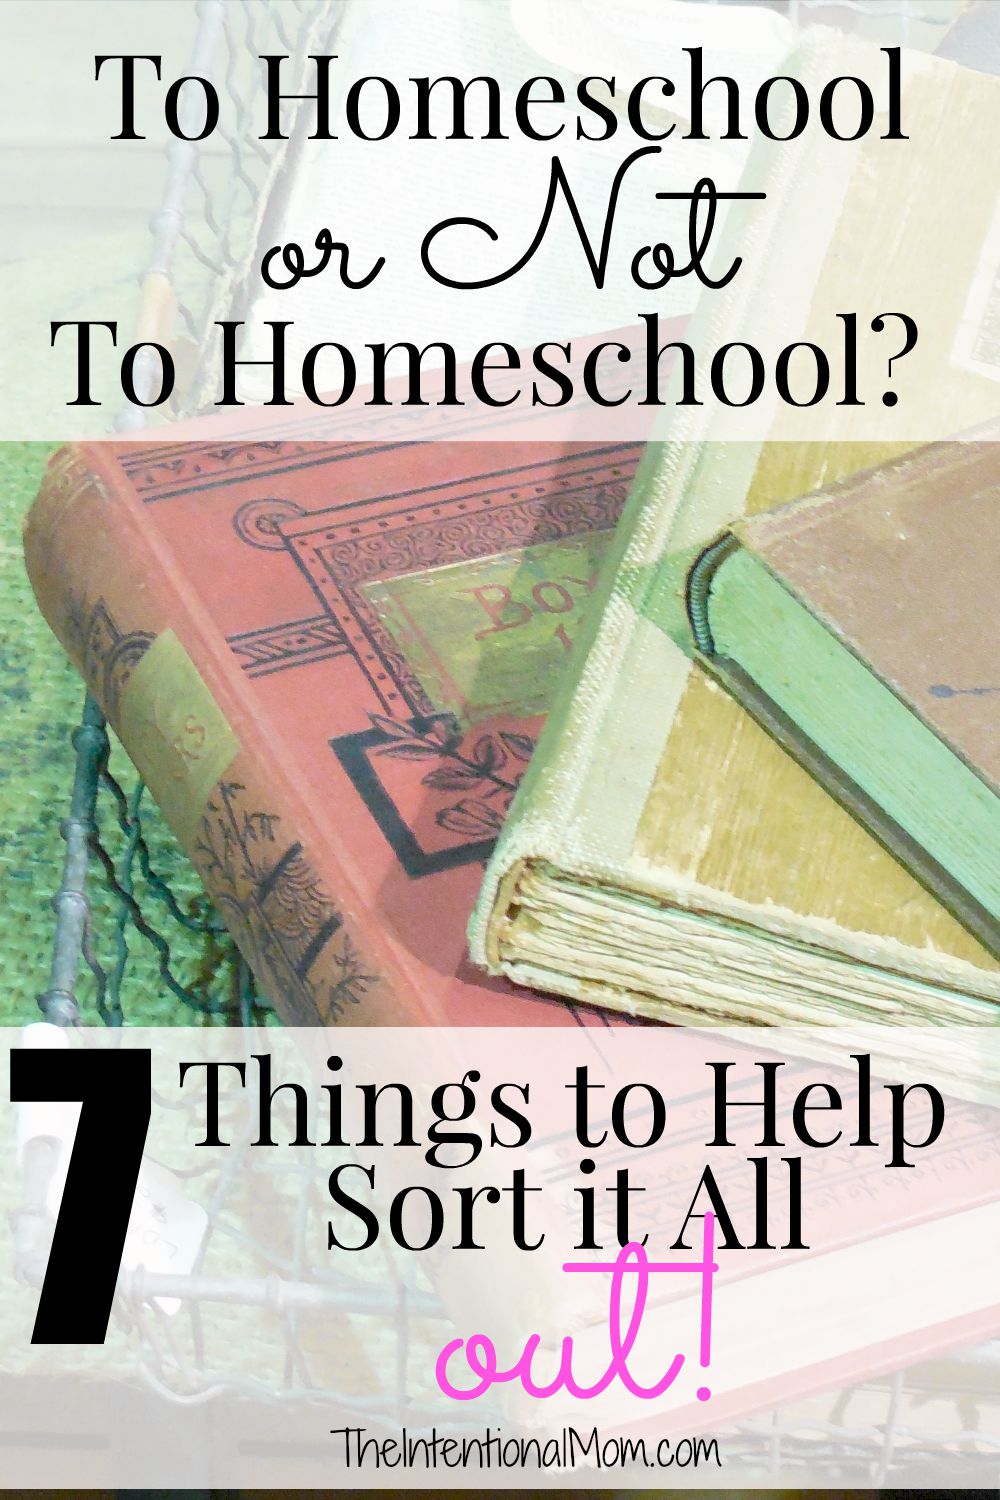 To Homeschool or Not to Homeschool? 7 Things to Help Sort it Out